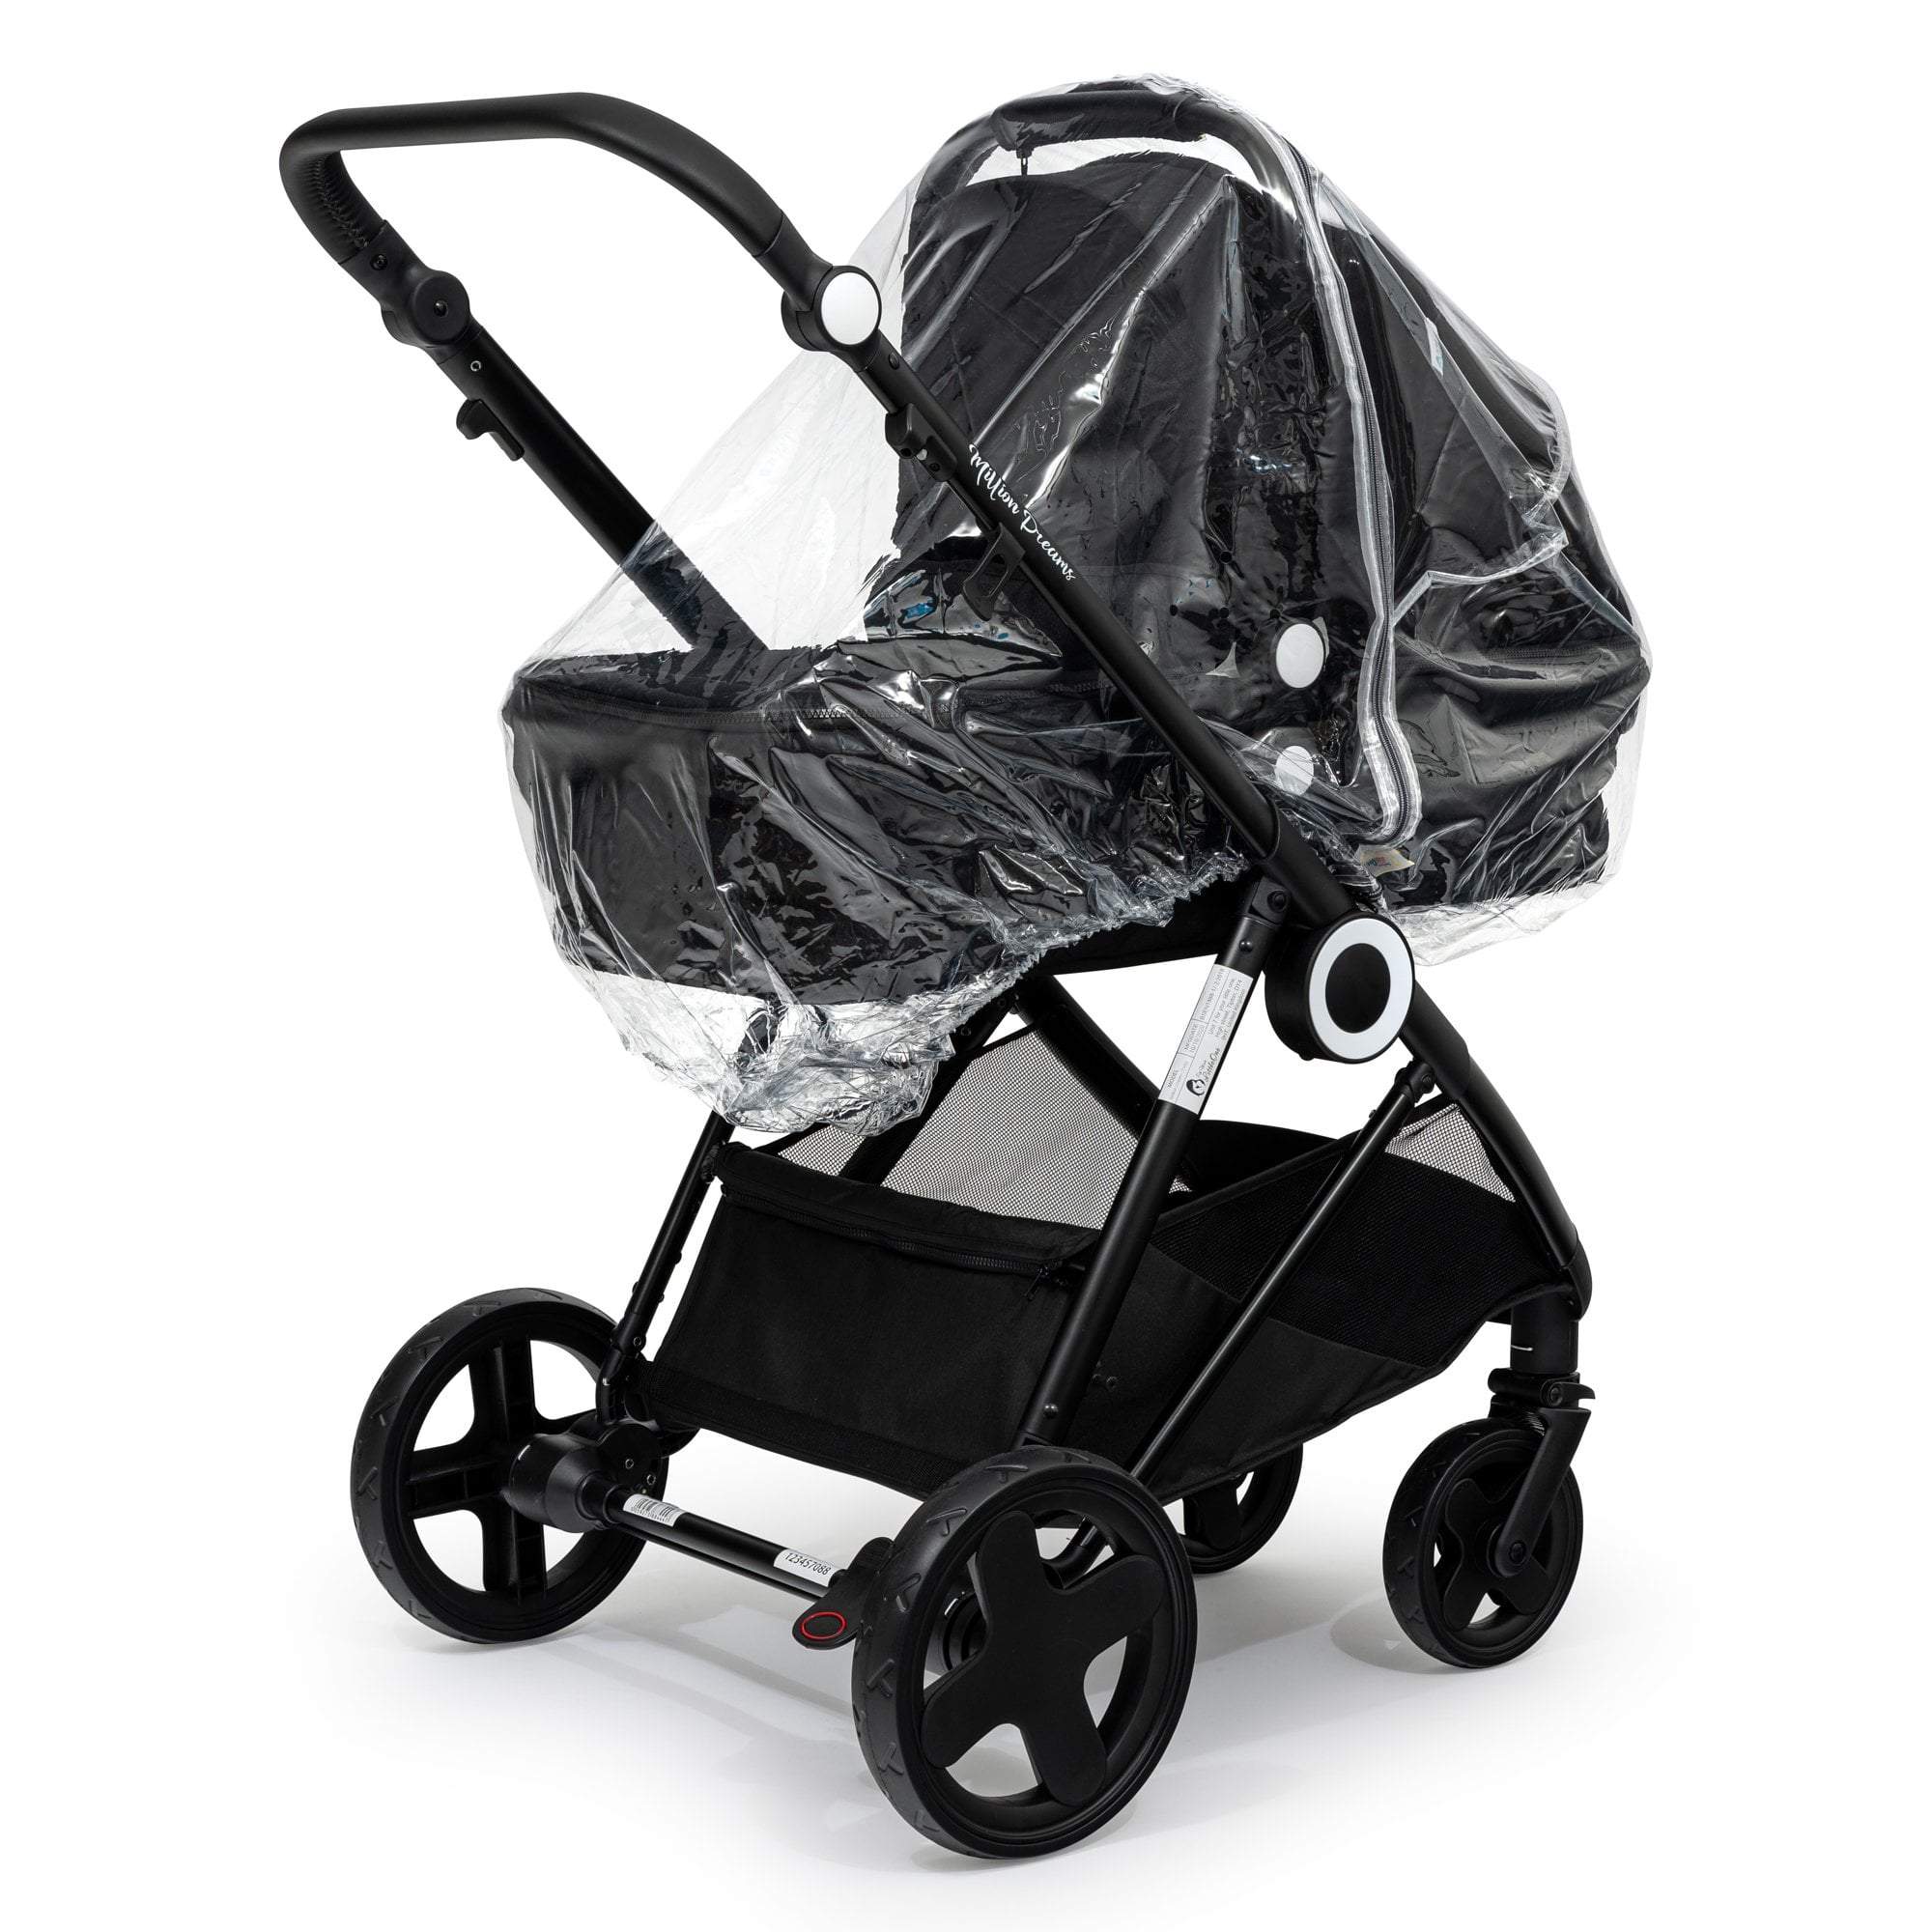 Carrycot Raincover Compatible With Zeta - Fits All Models - For Your Little One